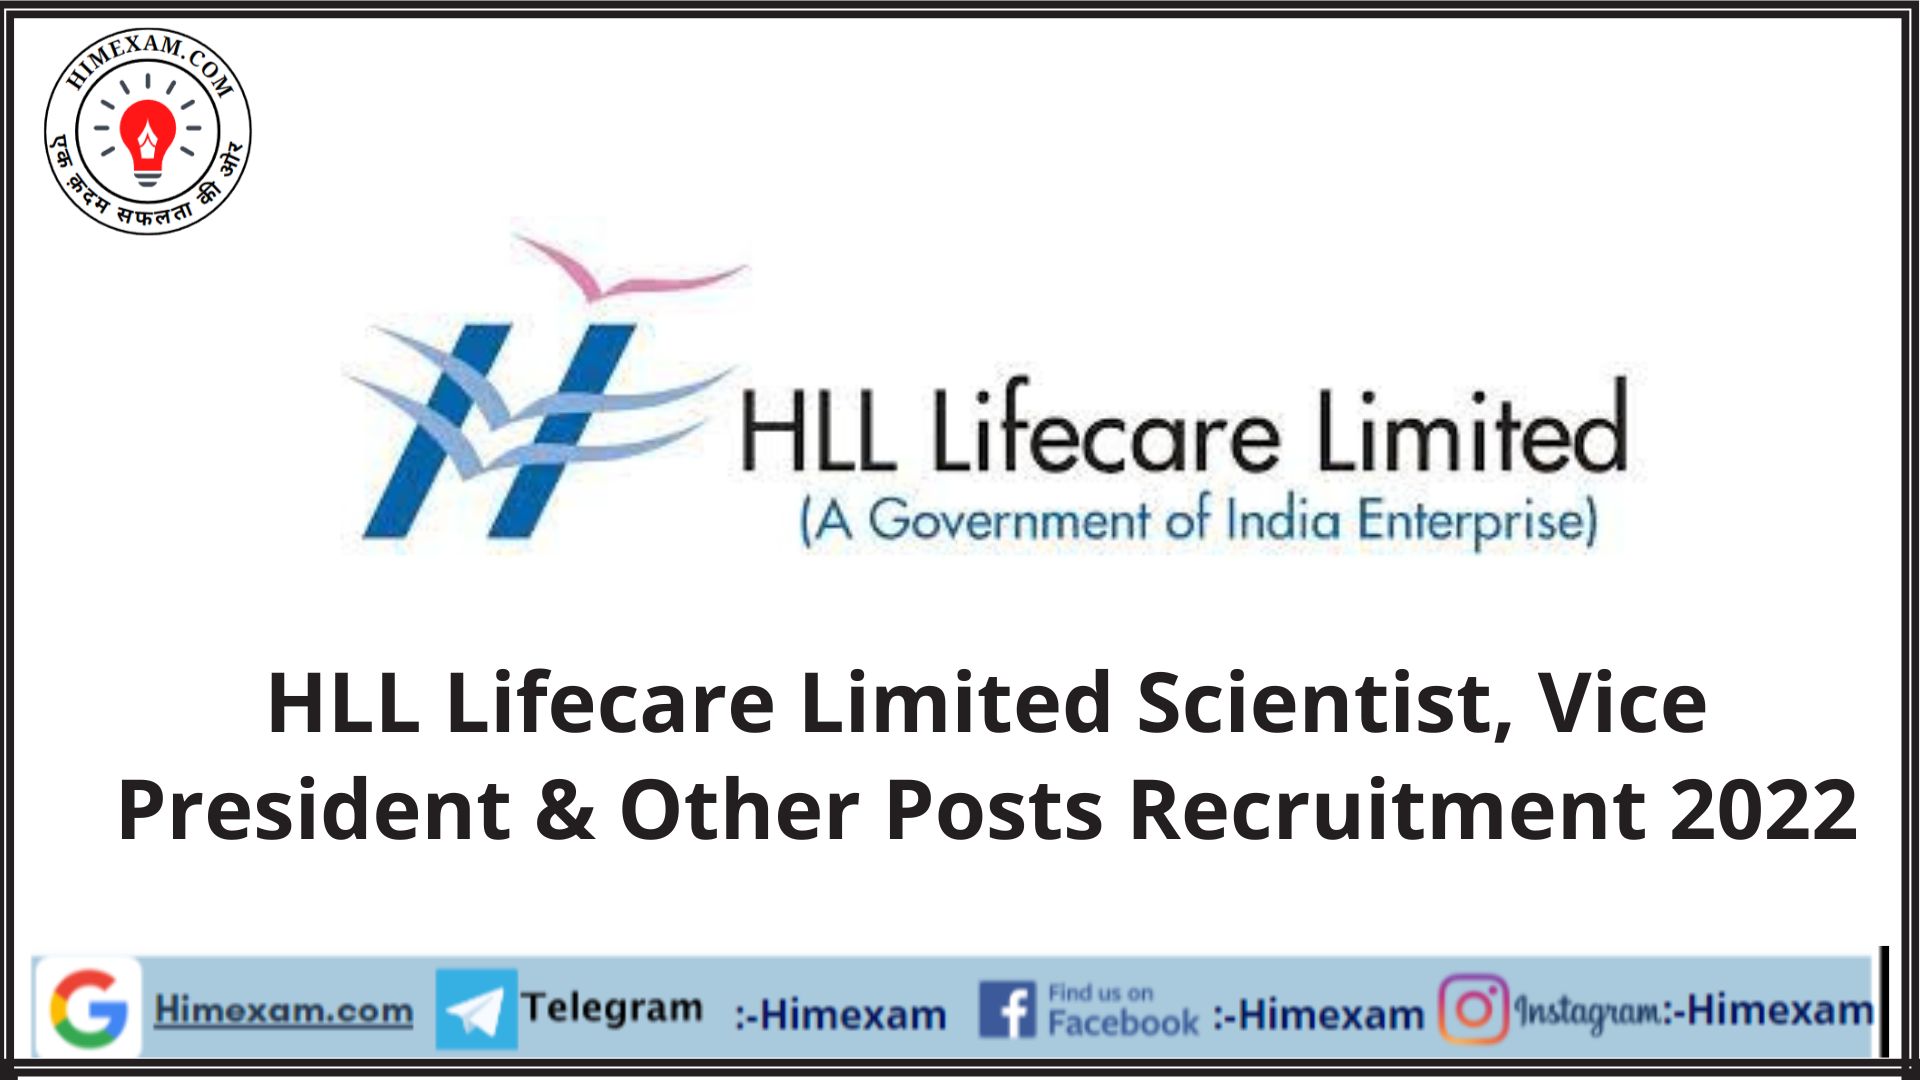 HLL Lifecare Limited Scientist, Vice President & Other Posts Recruitment 2022